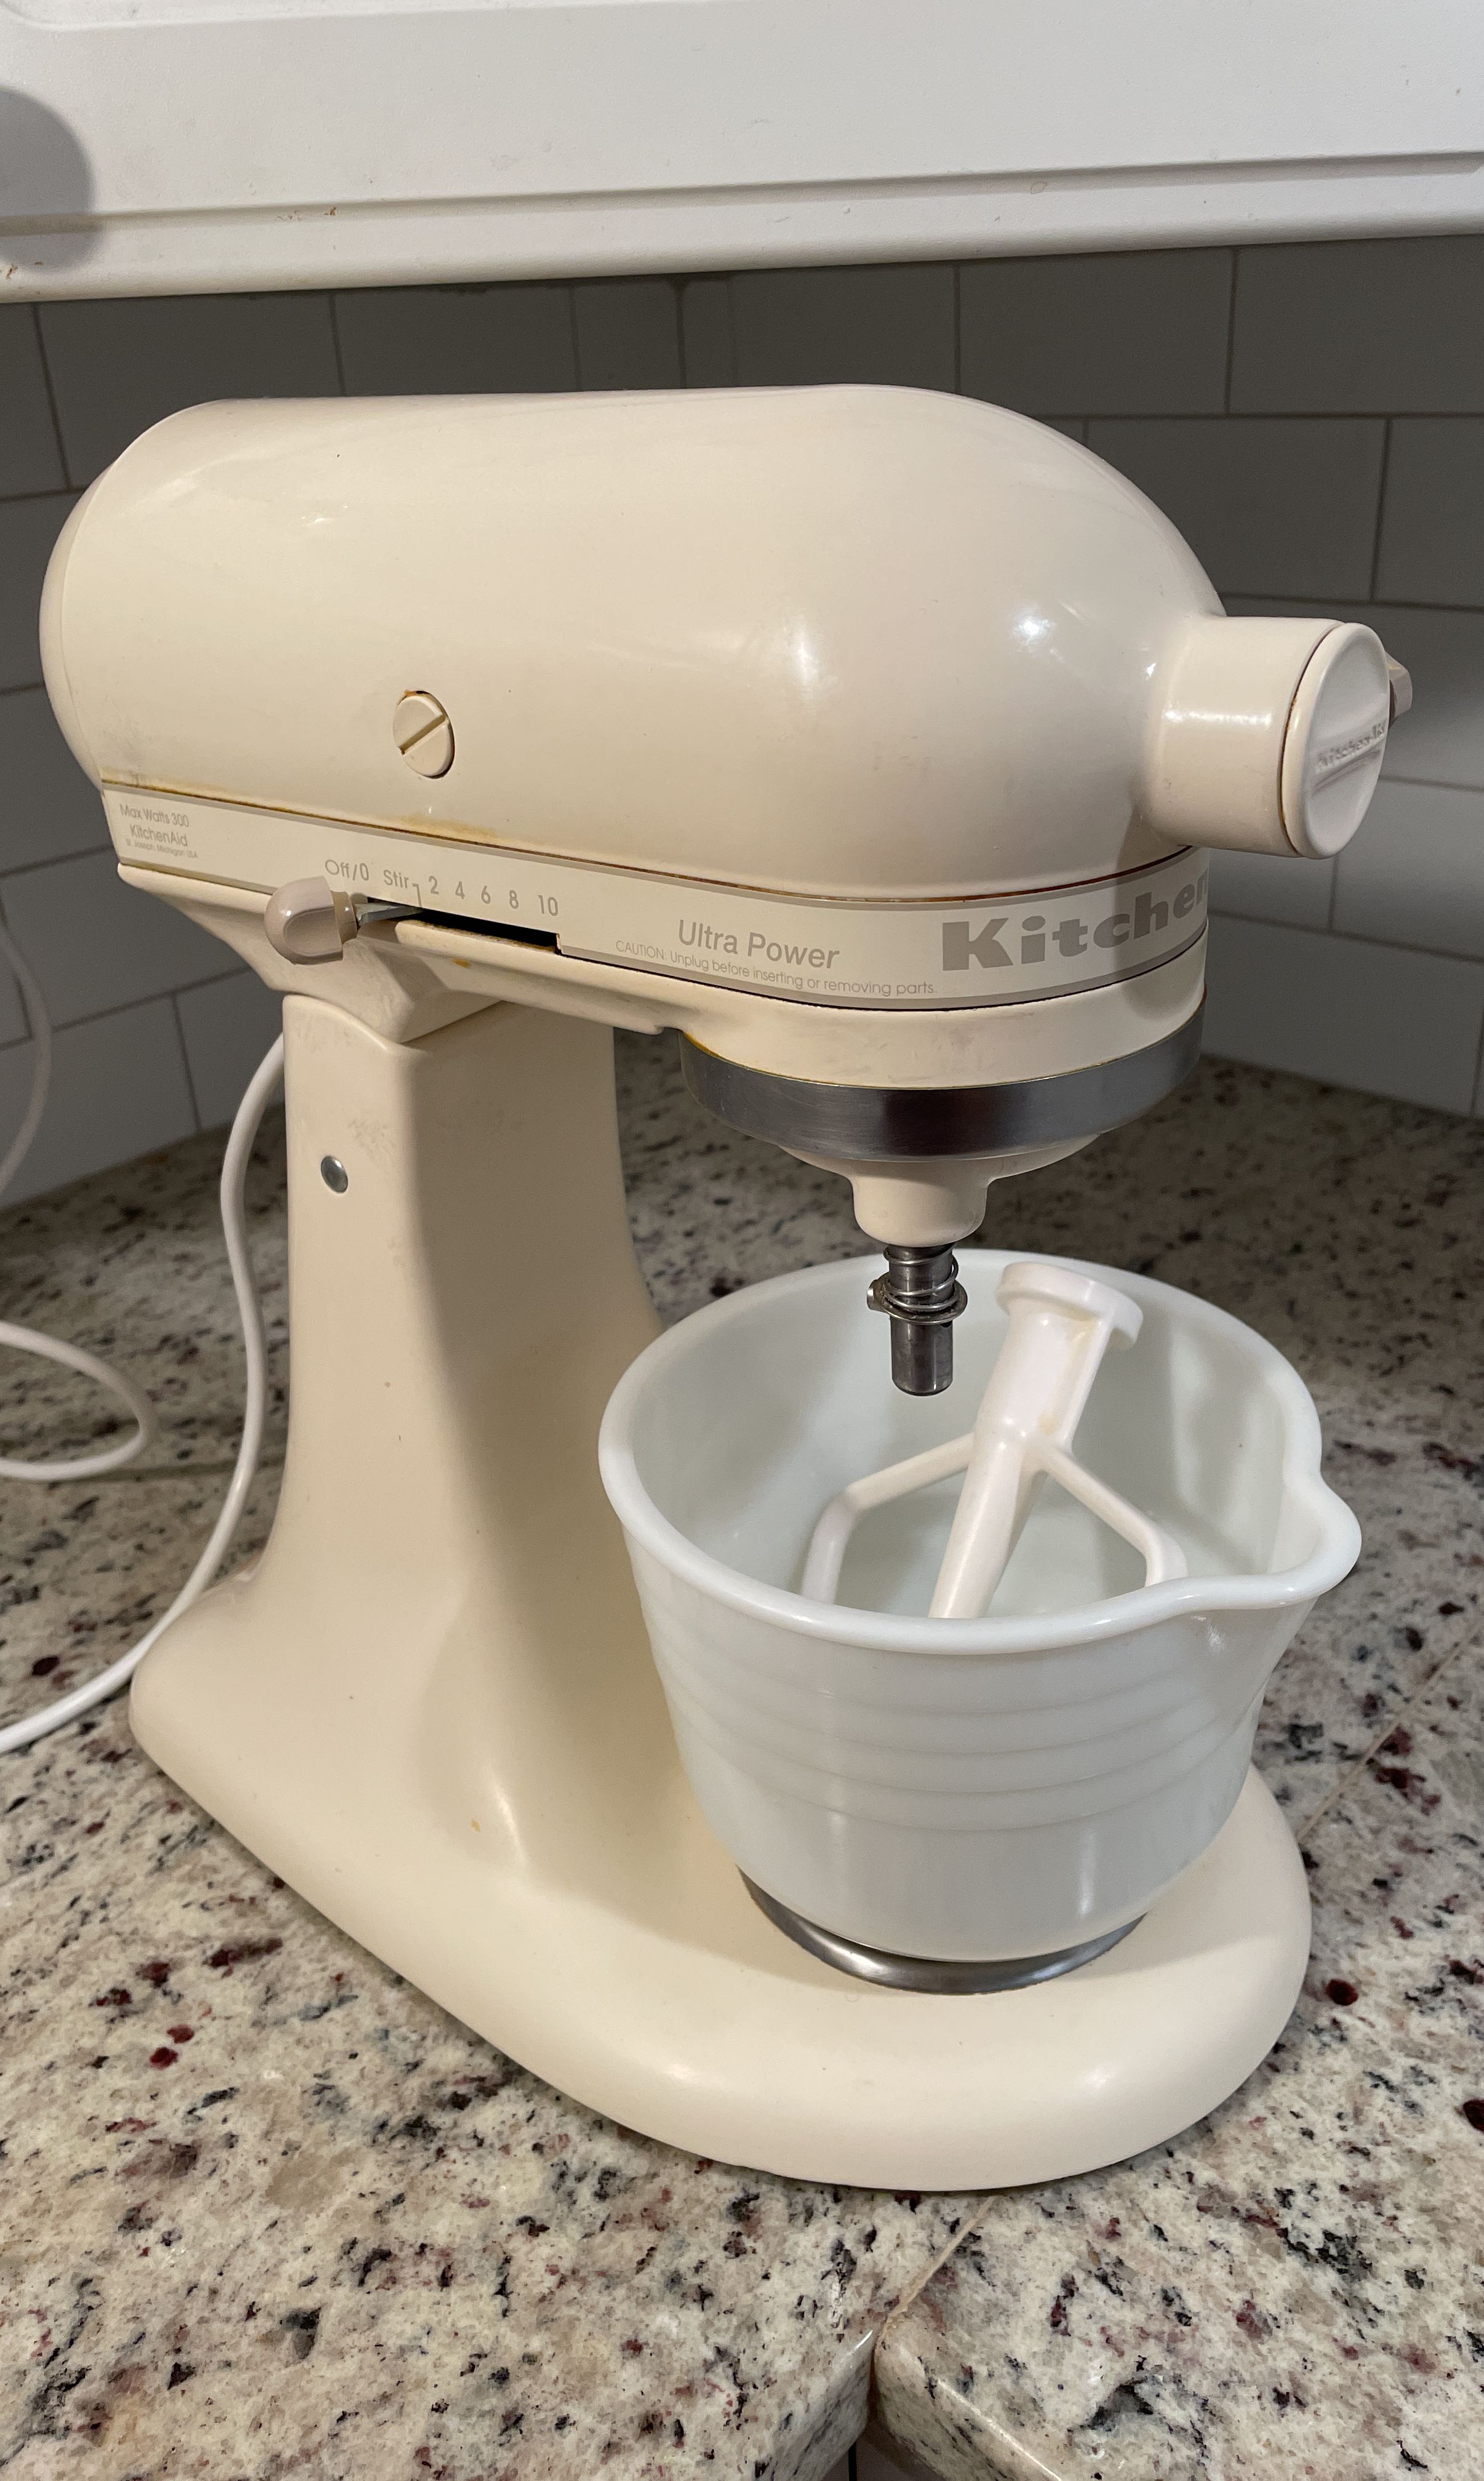 Kitchen Aid Mixer Cover,Stand Mixer Cover Compatible with 6-8 Quarts  Kitchen Aid Hamilton Stand Mixer,Kitchen Aid Covers For Stand Mixer.  Pioneer